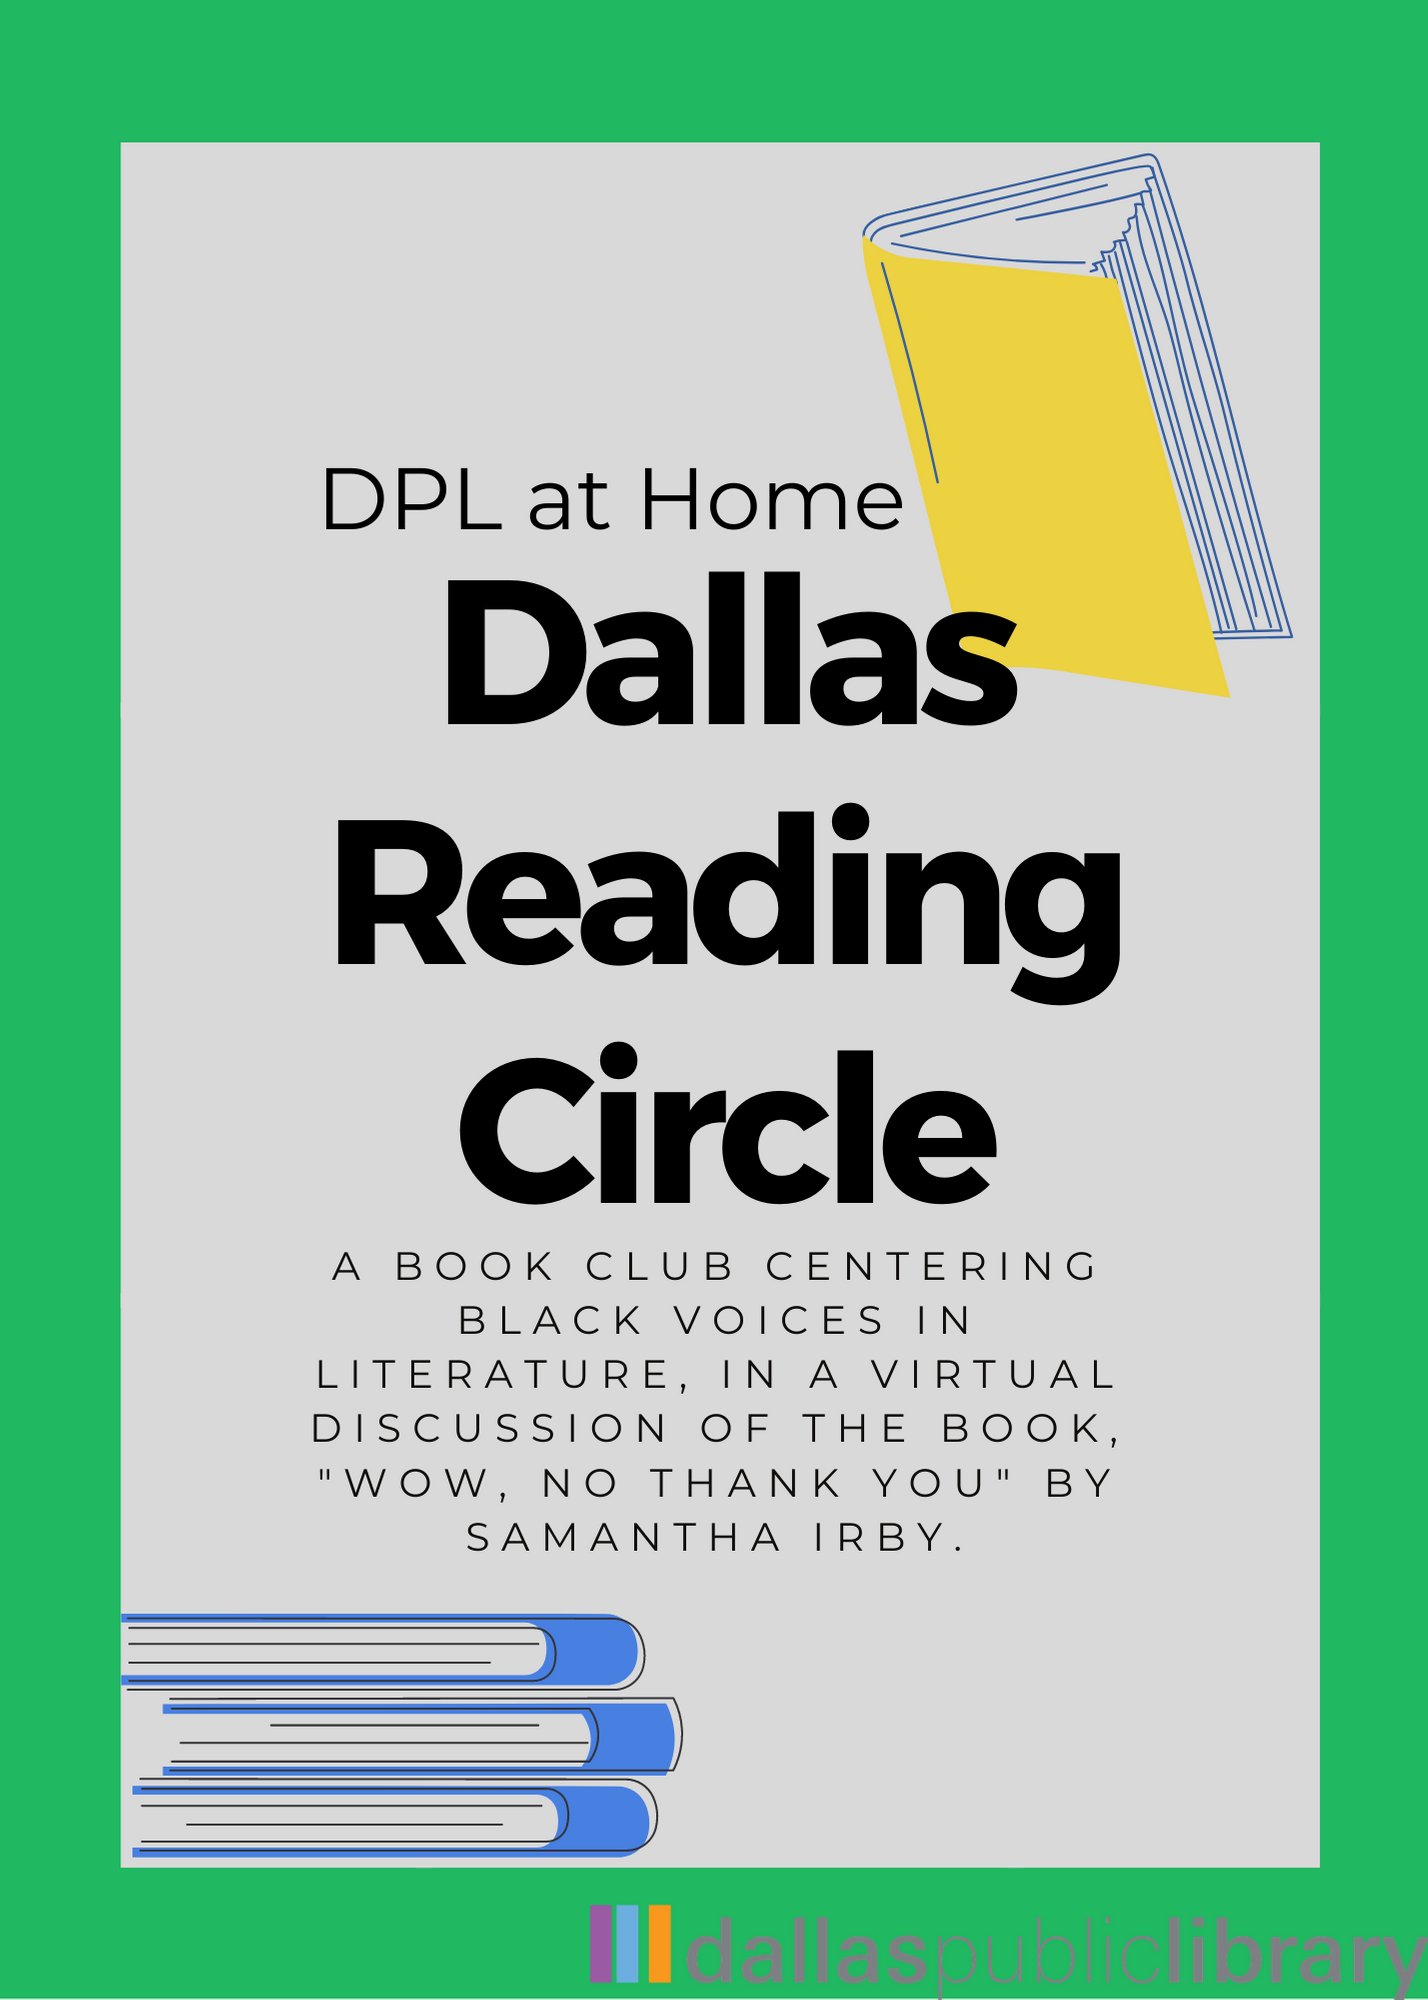 Flyer with green border and a stack of blue books on bottom left corner and a yellow book on the top right corner. Then text that says DPL at home Dallas Reading Circle a book club centering black voices in literature. In a discussion of the book, "Wow, no thank you" by Samantha Irby.